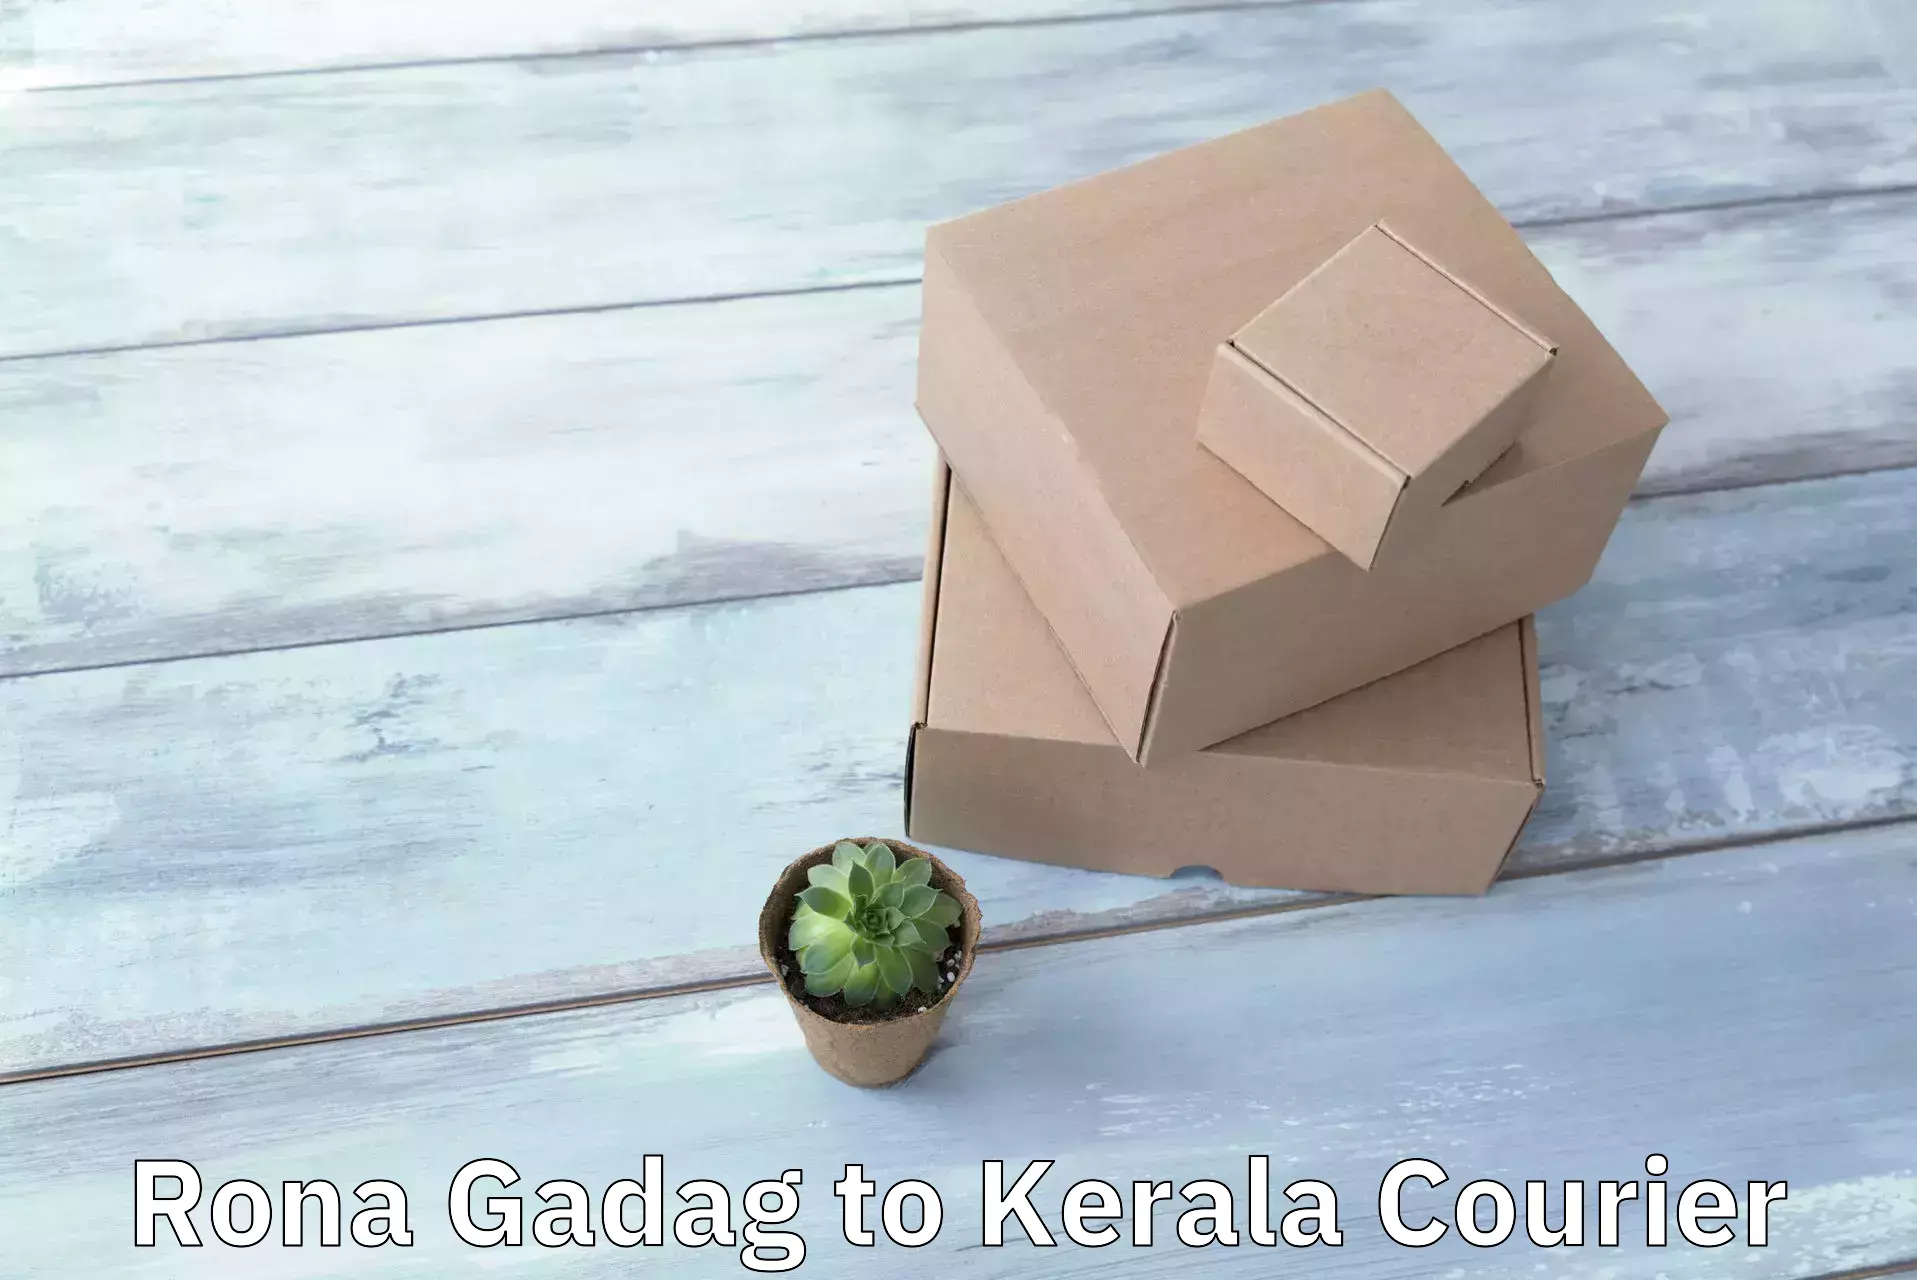 End-to-end delivery Rona Gadag to Kerala